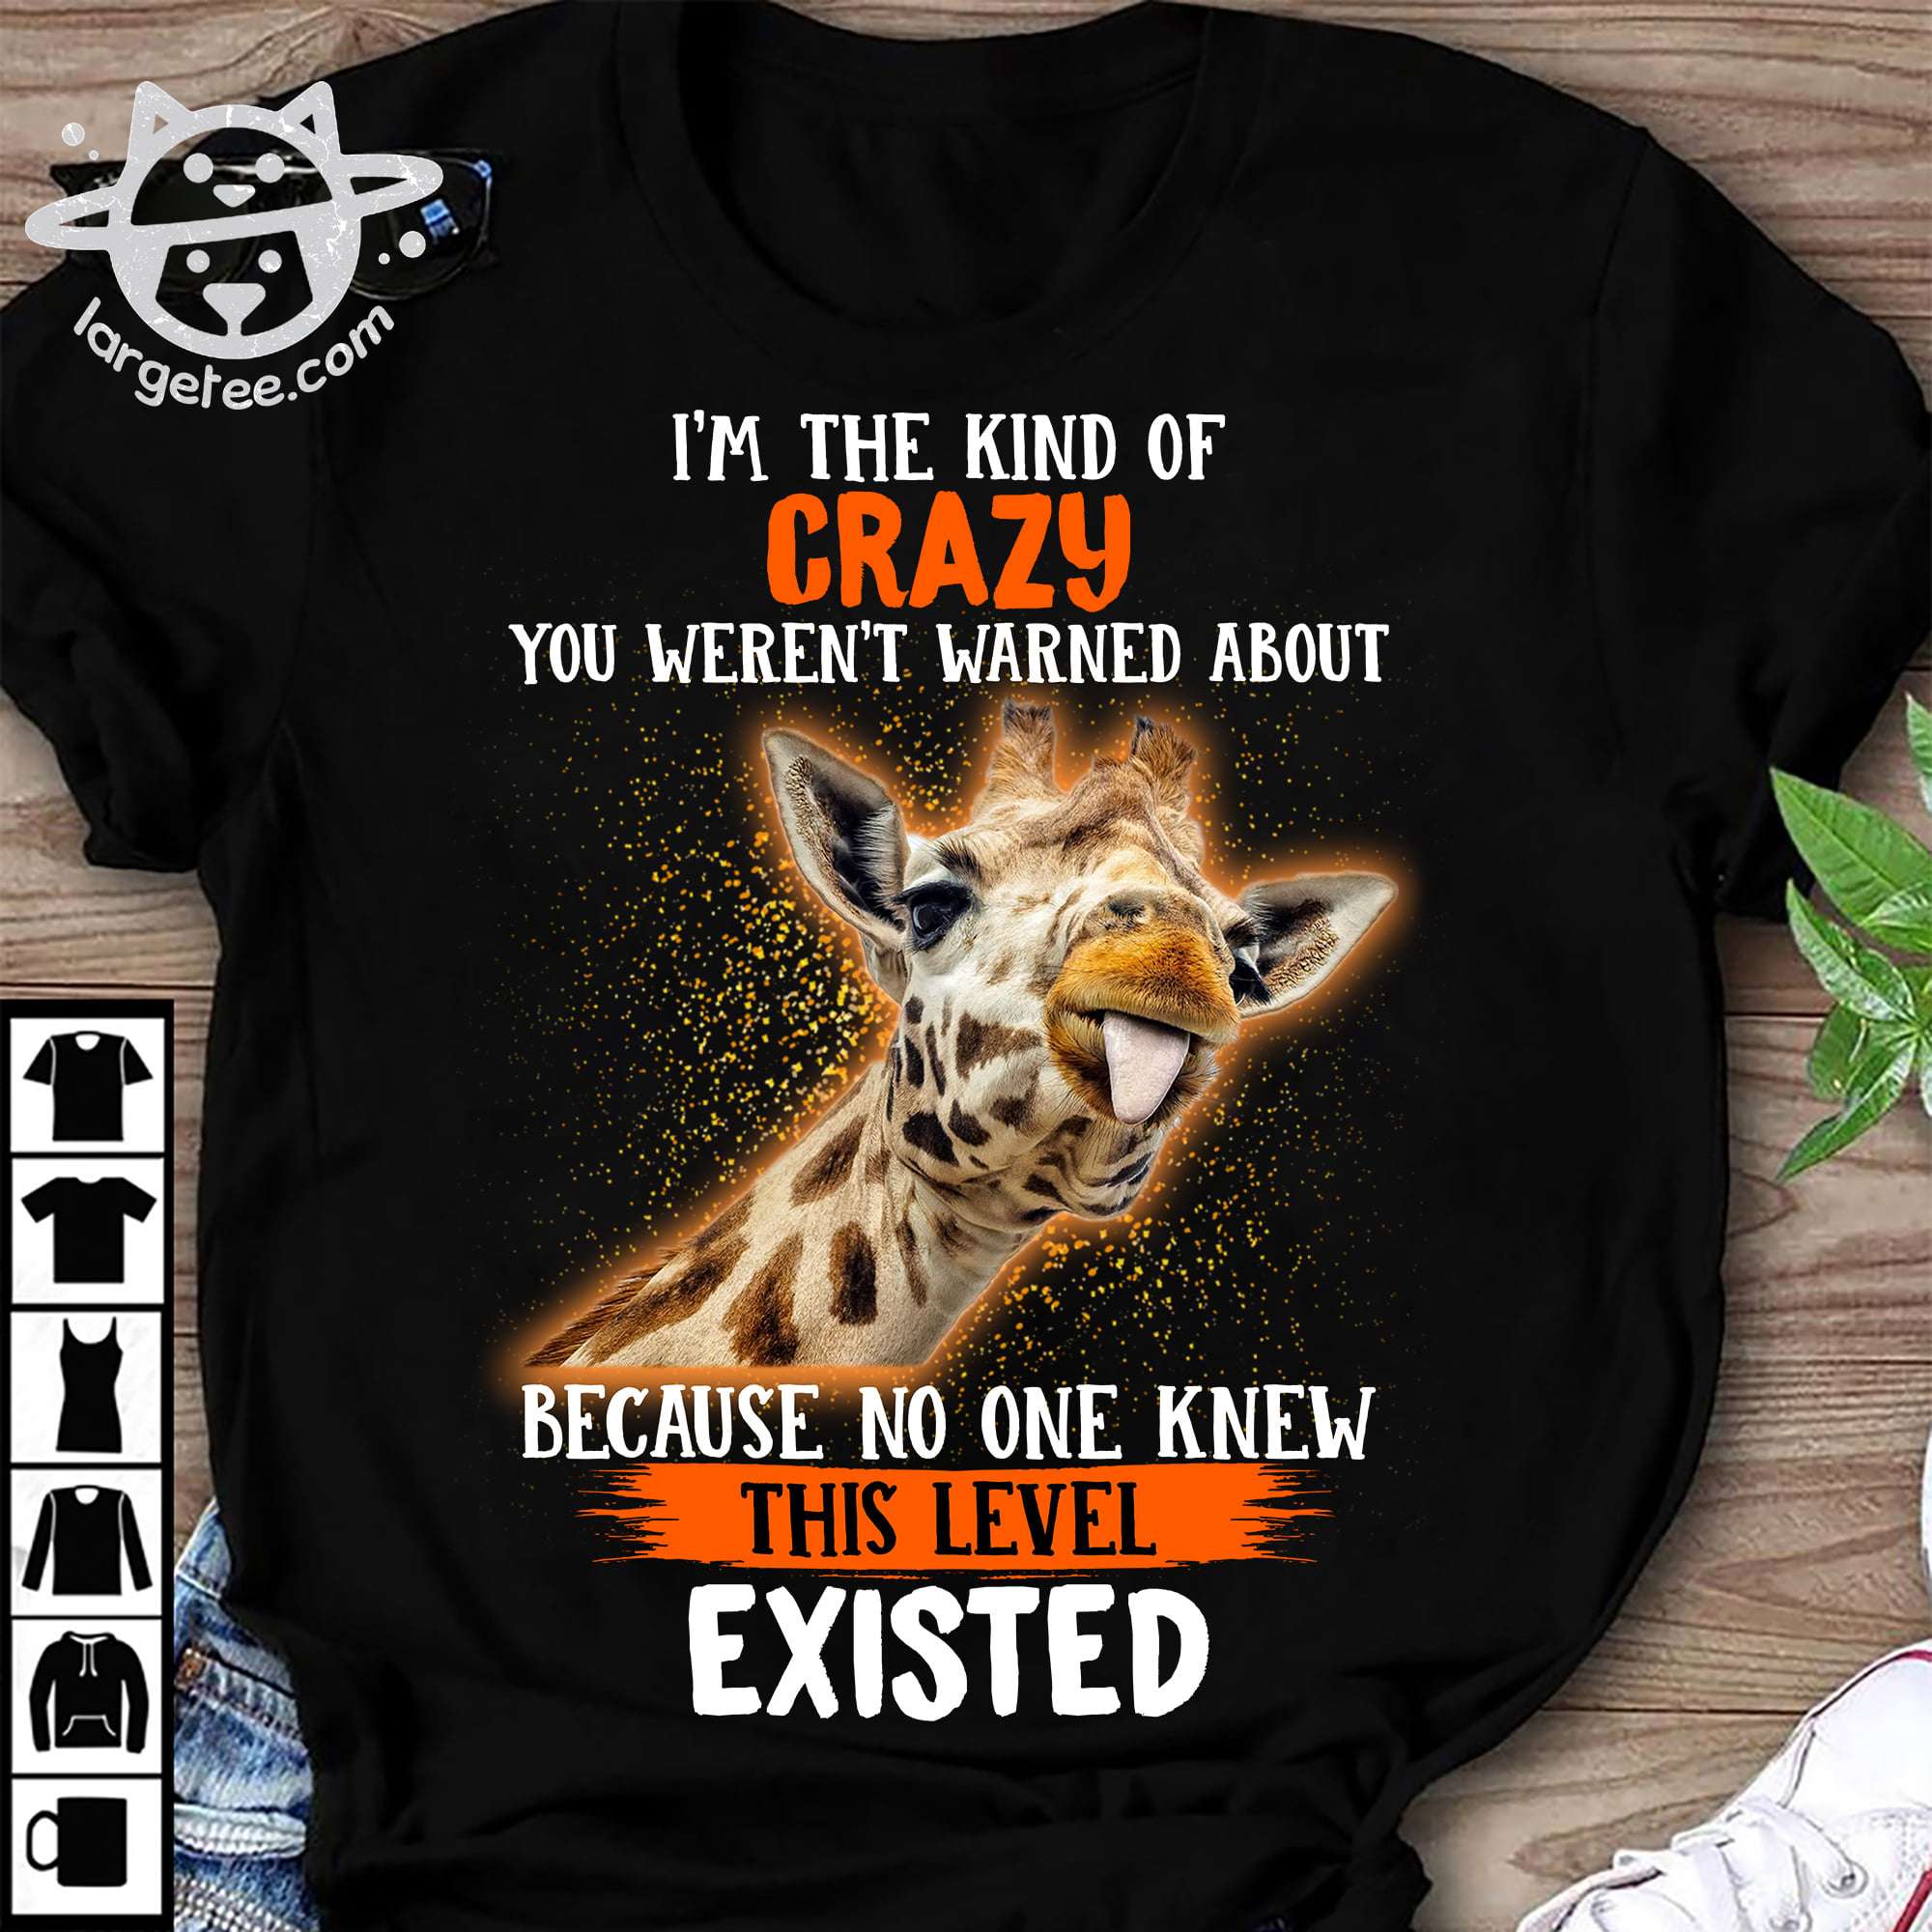 I'm the kind of crazy you weren't warned about because no one knew this level existed - Funny giraffe graphic T-shirt